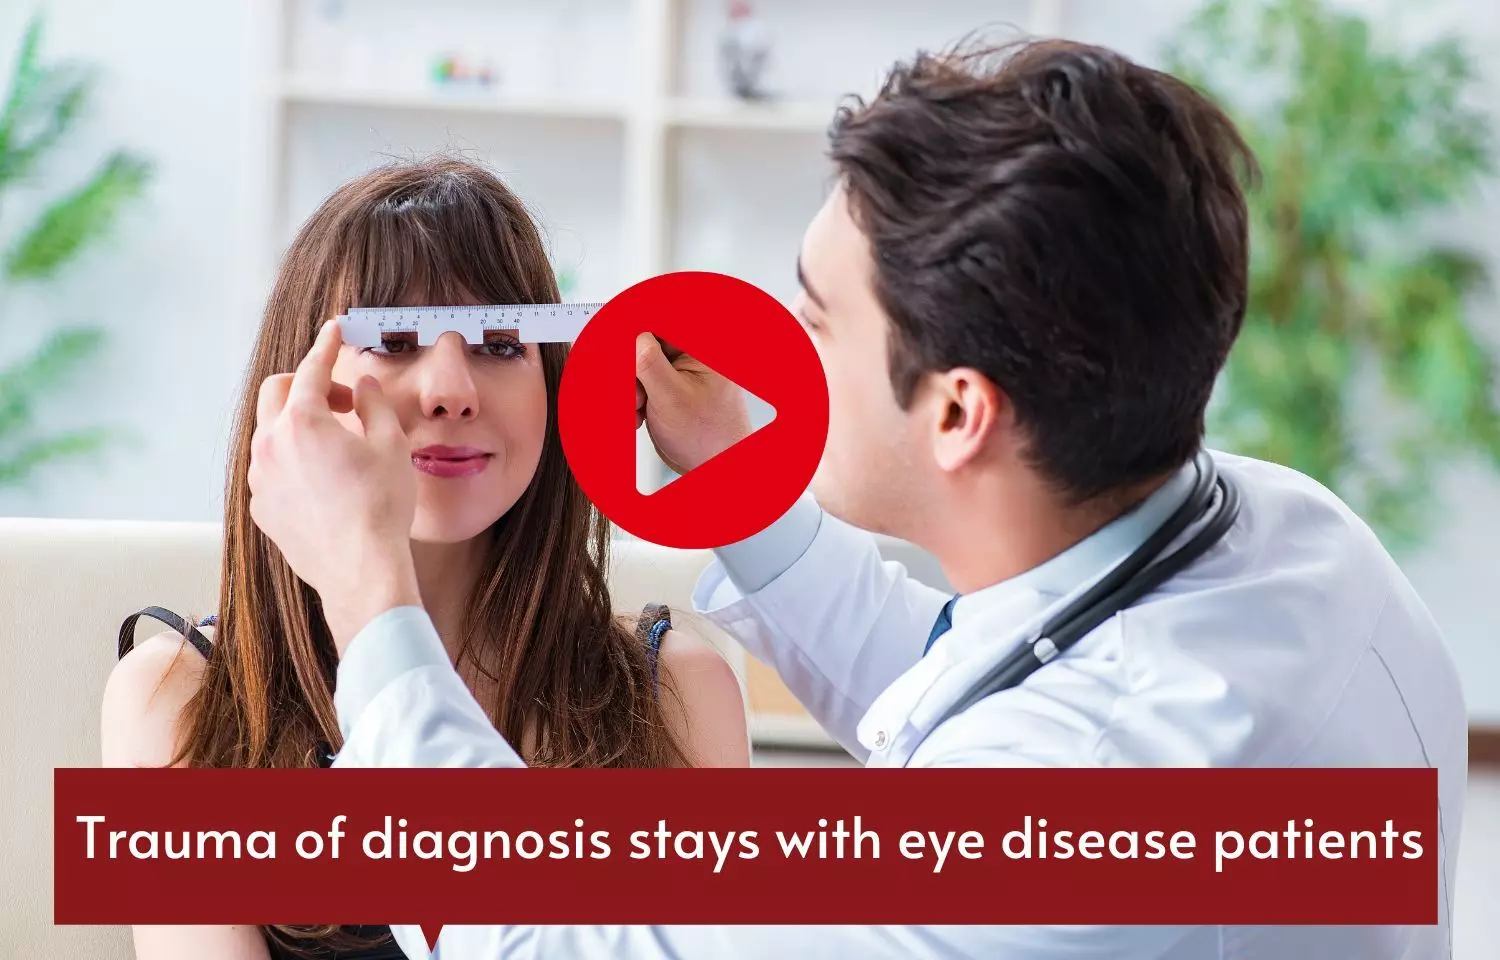 Trauma of diagnosis stays with eye disease patients